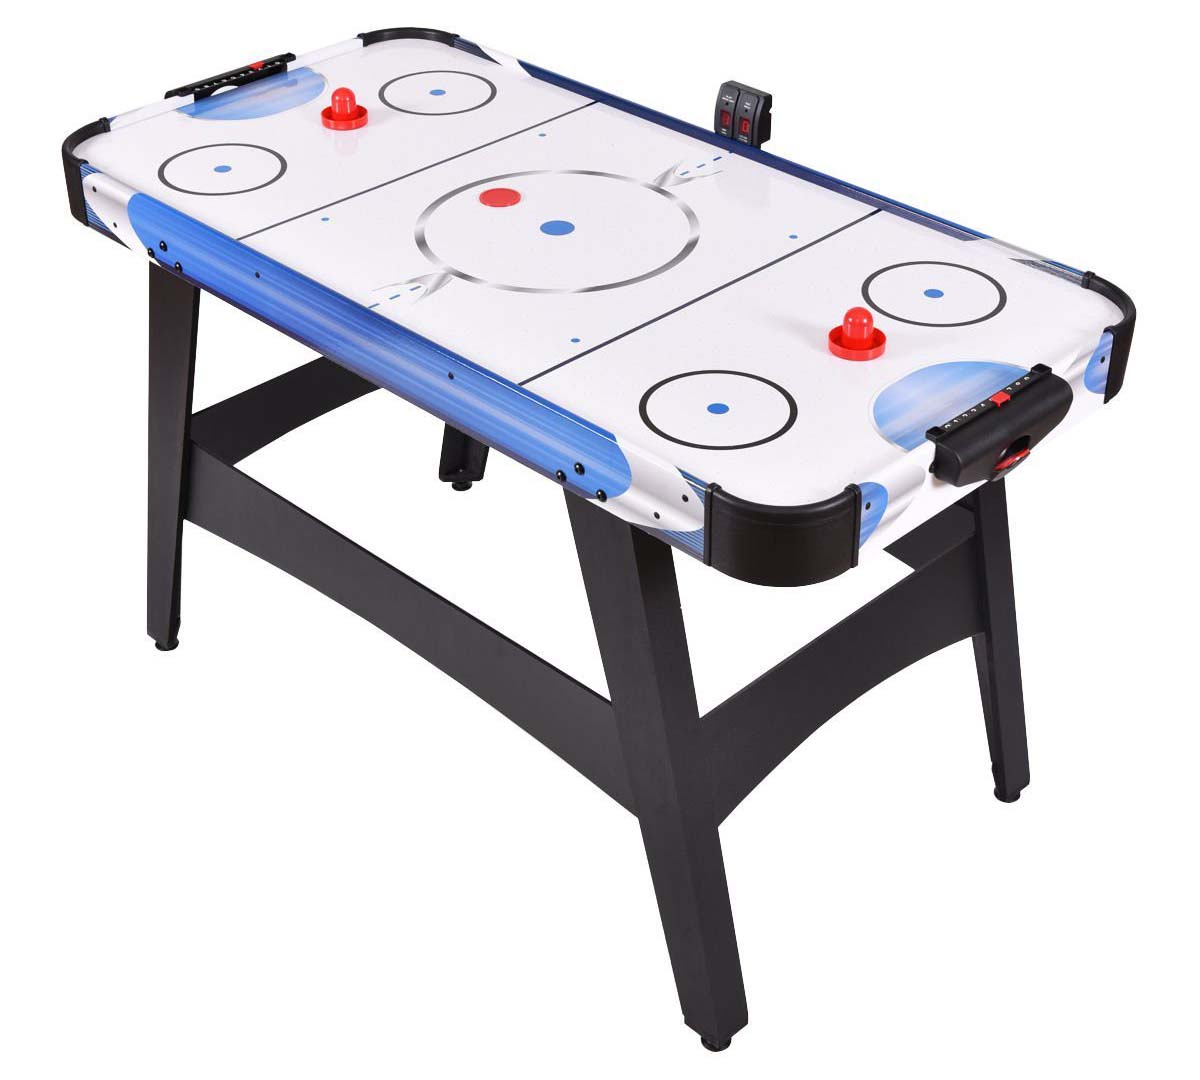 GoPlus 54” Air Hockey Table Indoor Sports Game for Kids